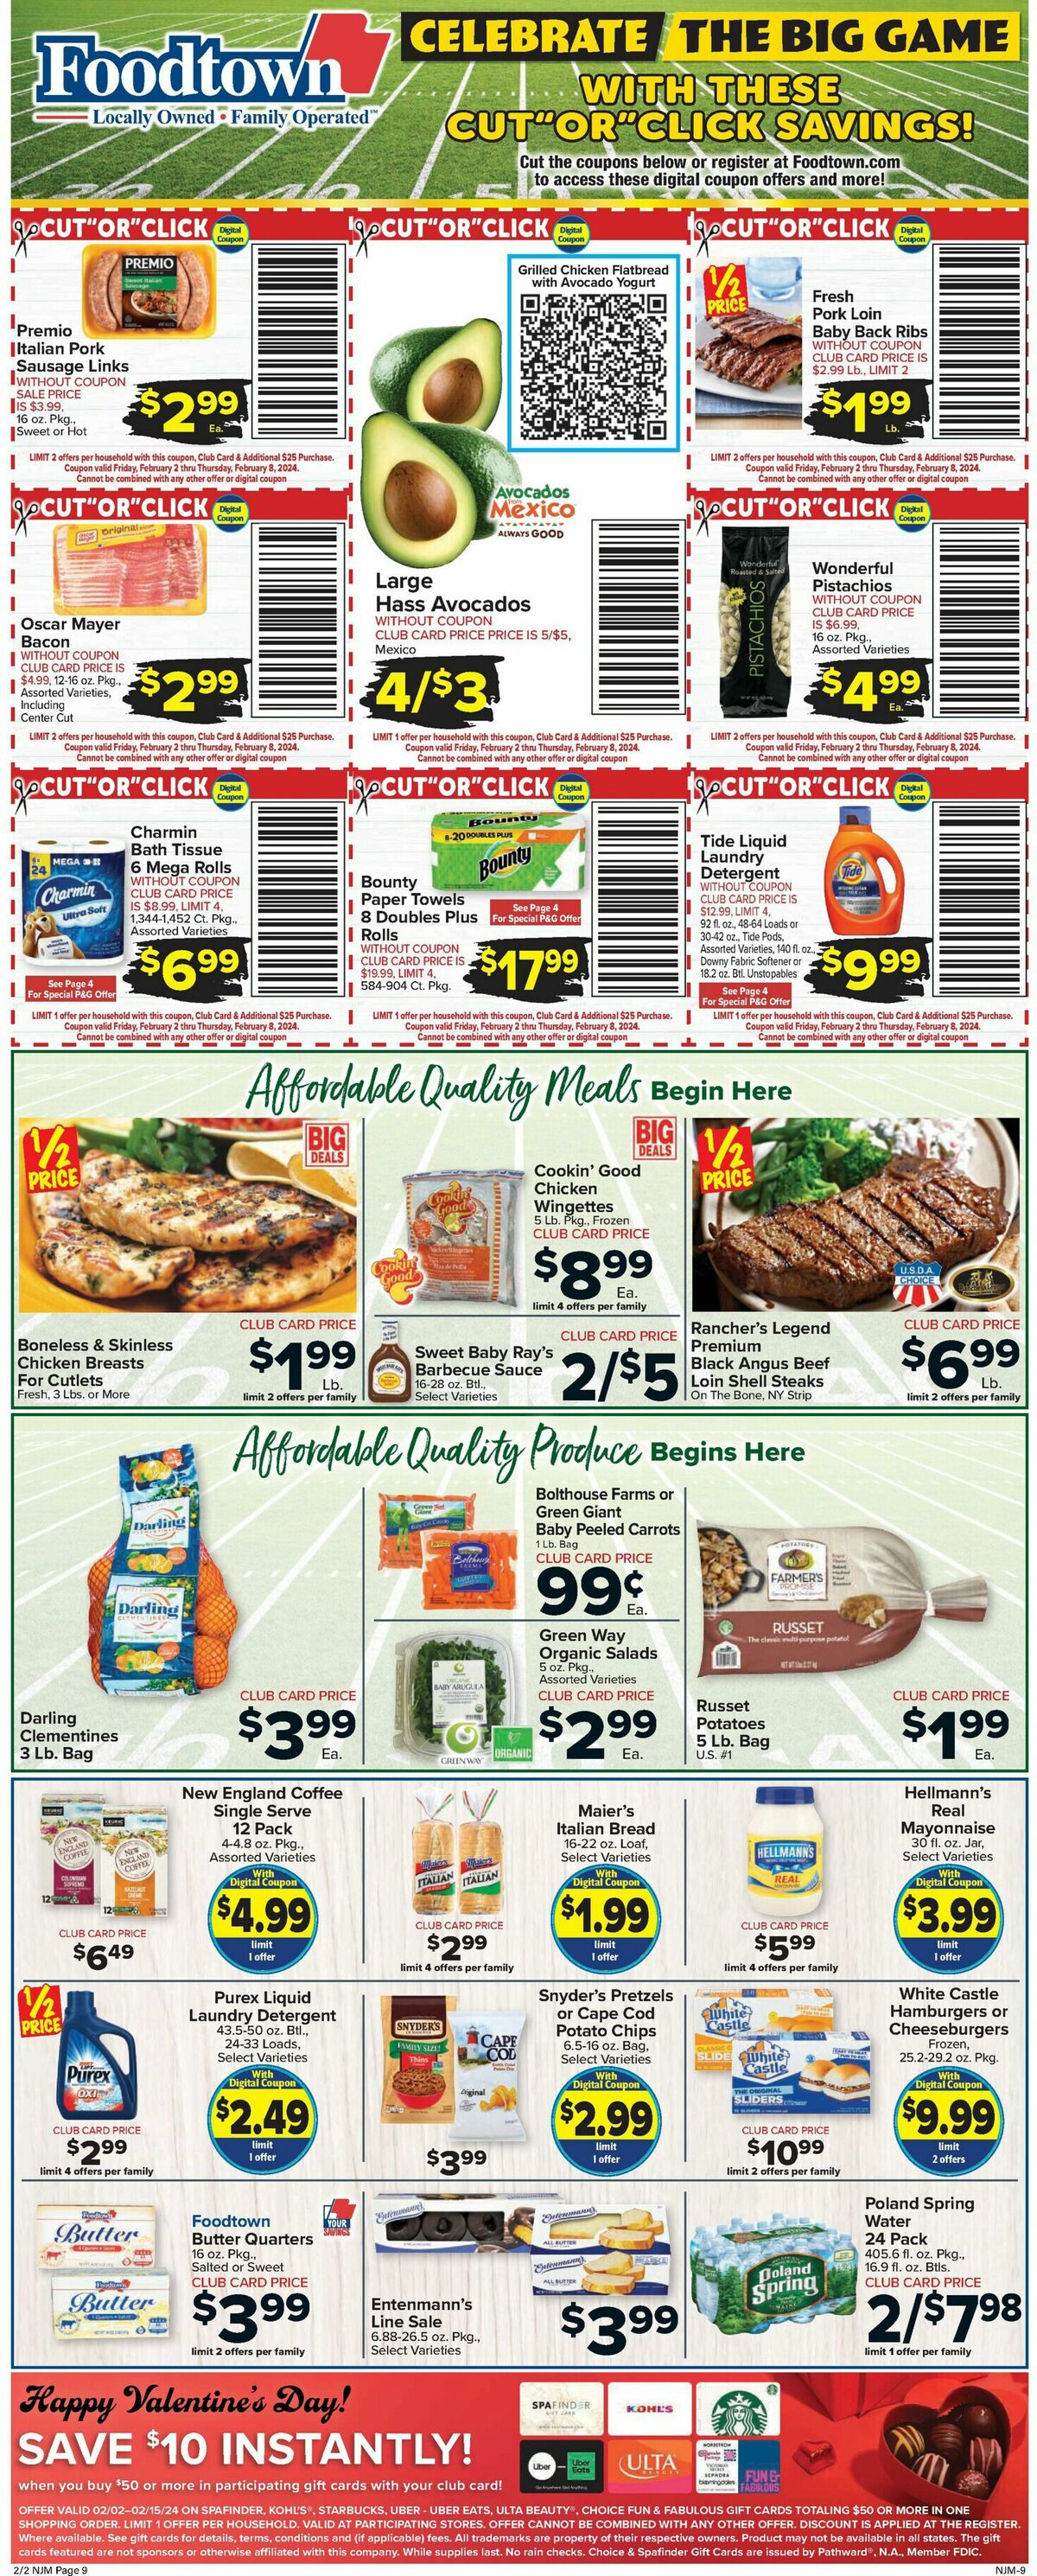 Food Town Weekly Ad from February 2